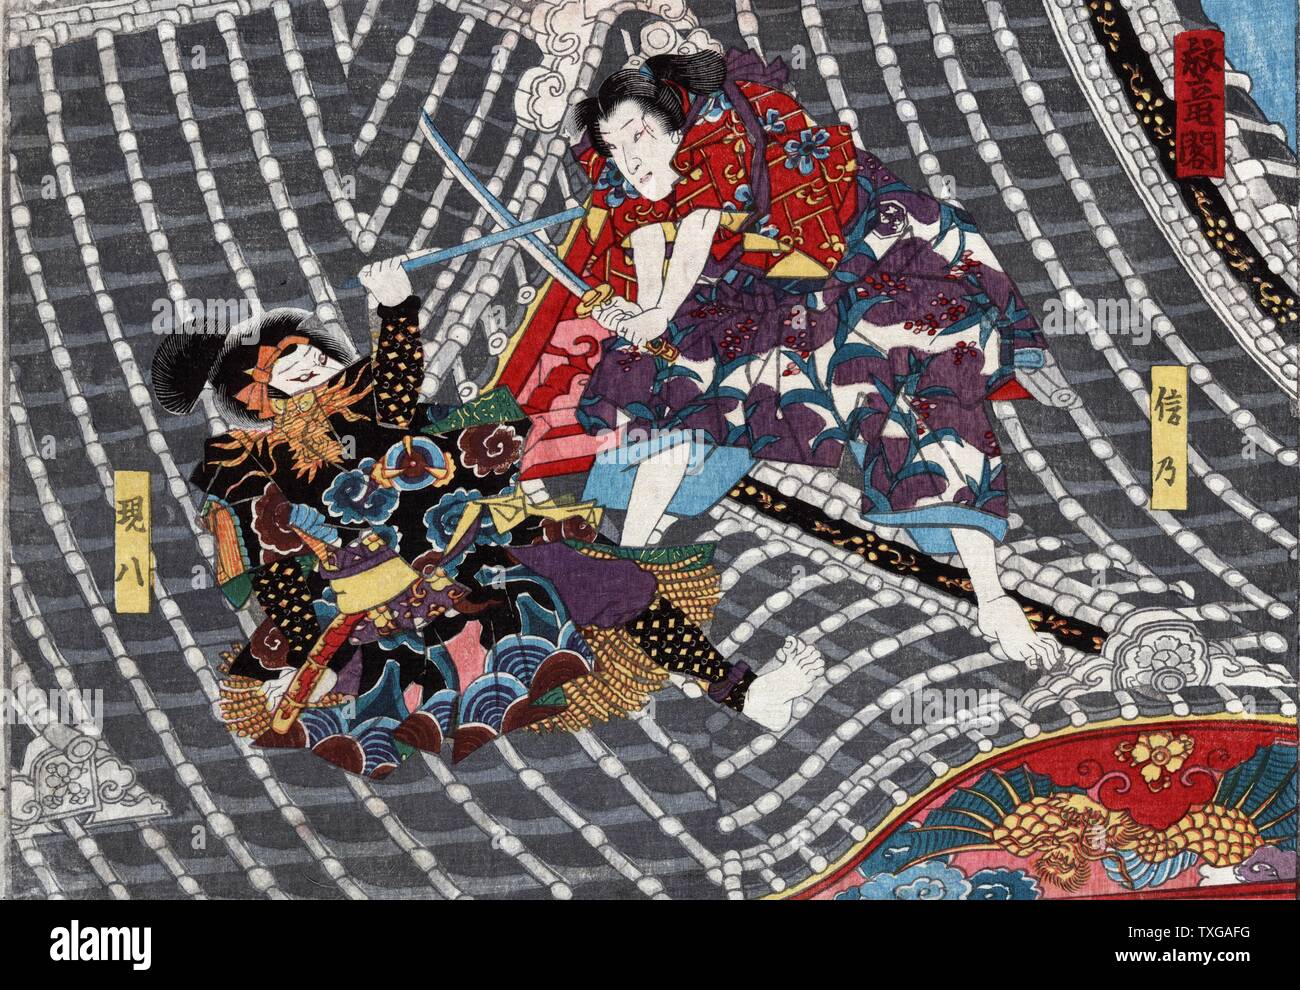 Horyu Tower. Print shows two men fighting with swords on the roof of a tower. Stock Photo